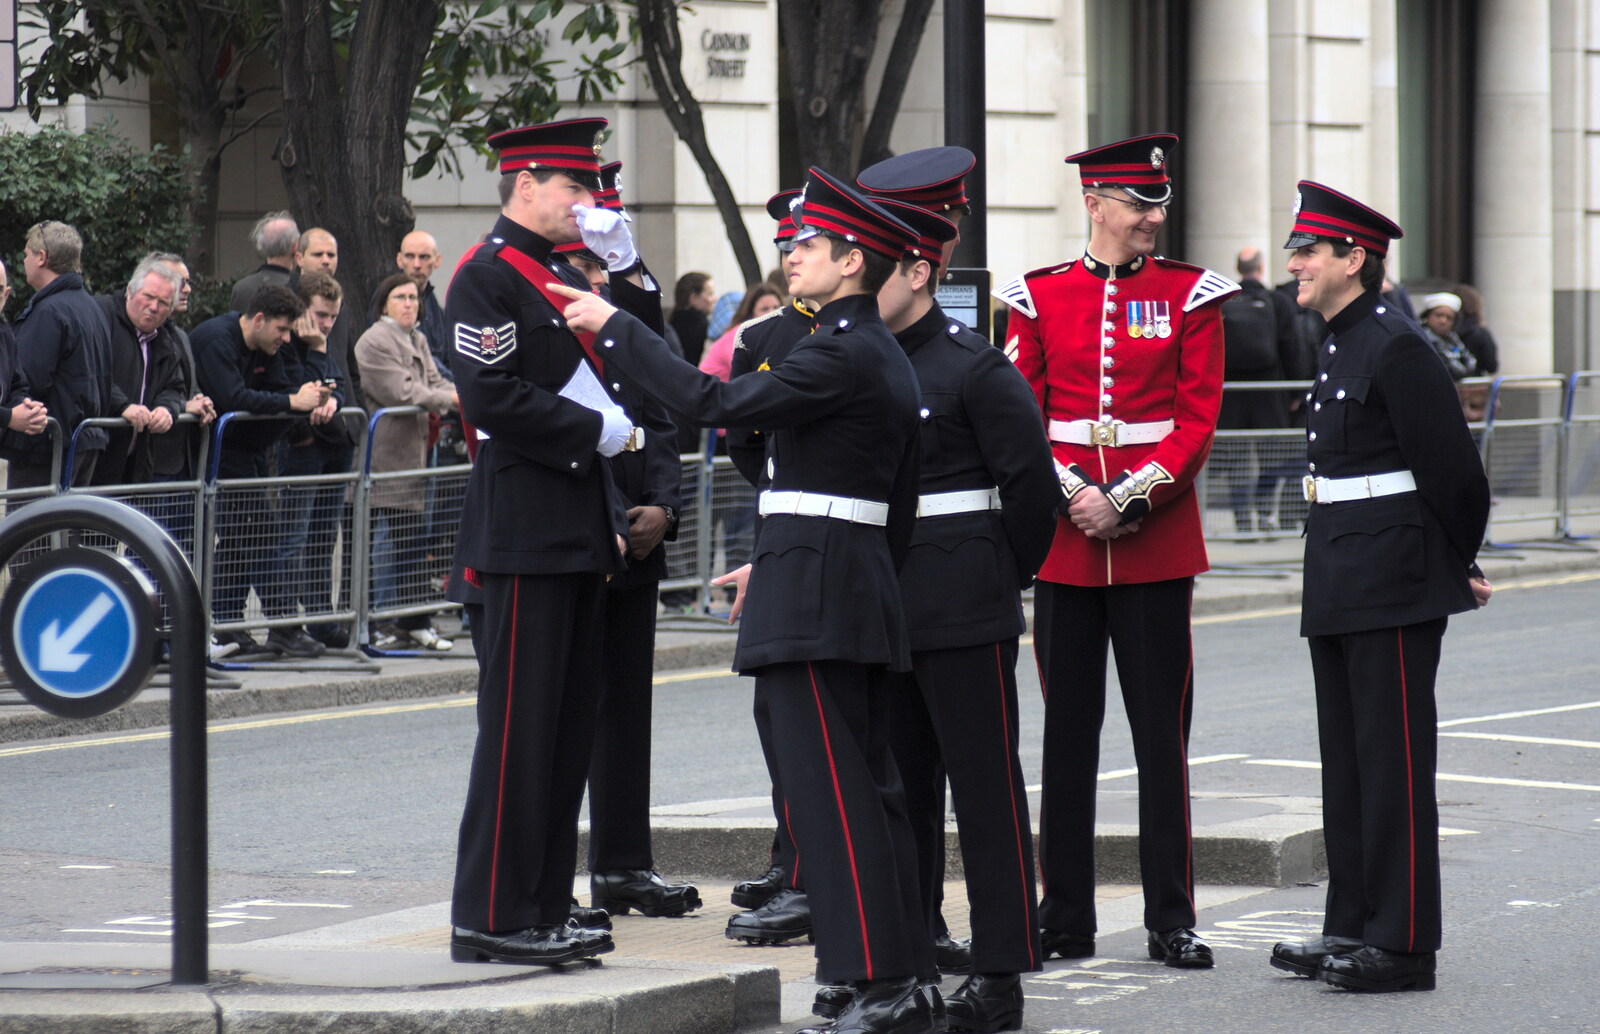 A soldier points from Margaret Thatcher's Funeral, St. Paul's, London - 17th April 2013